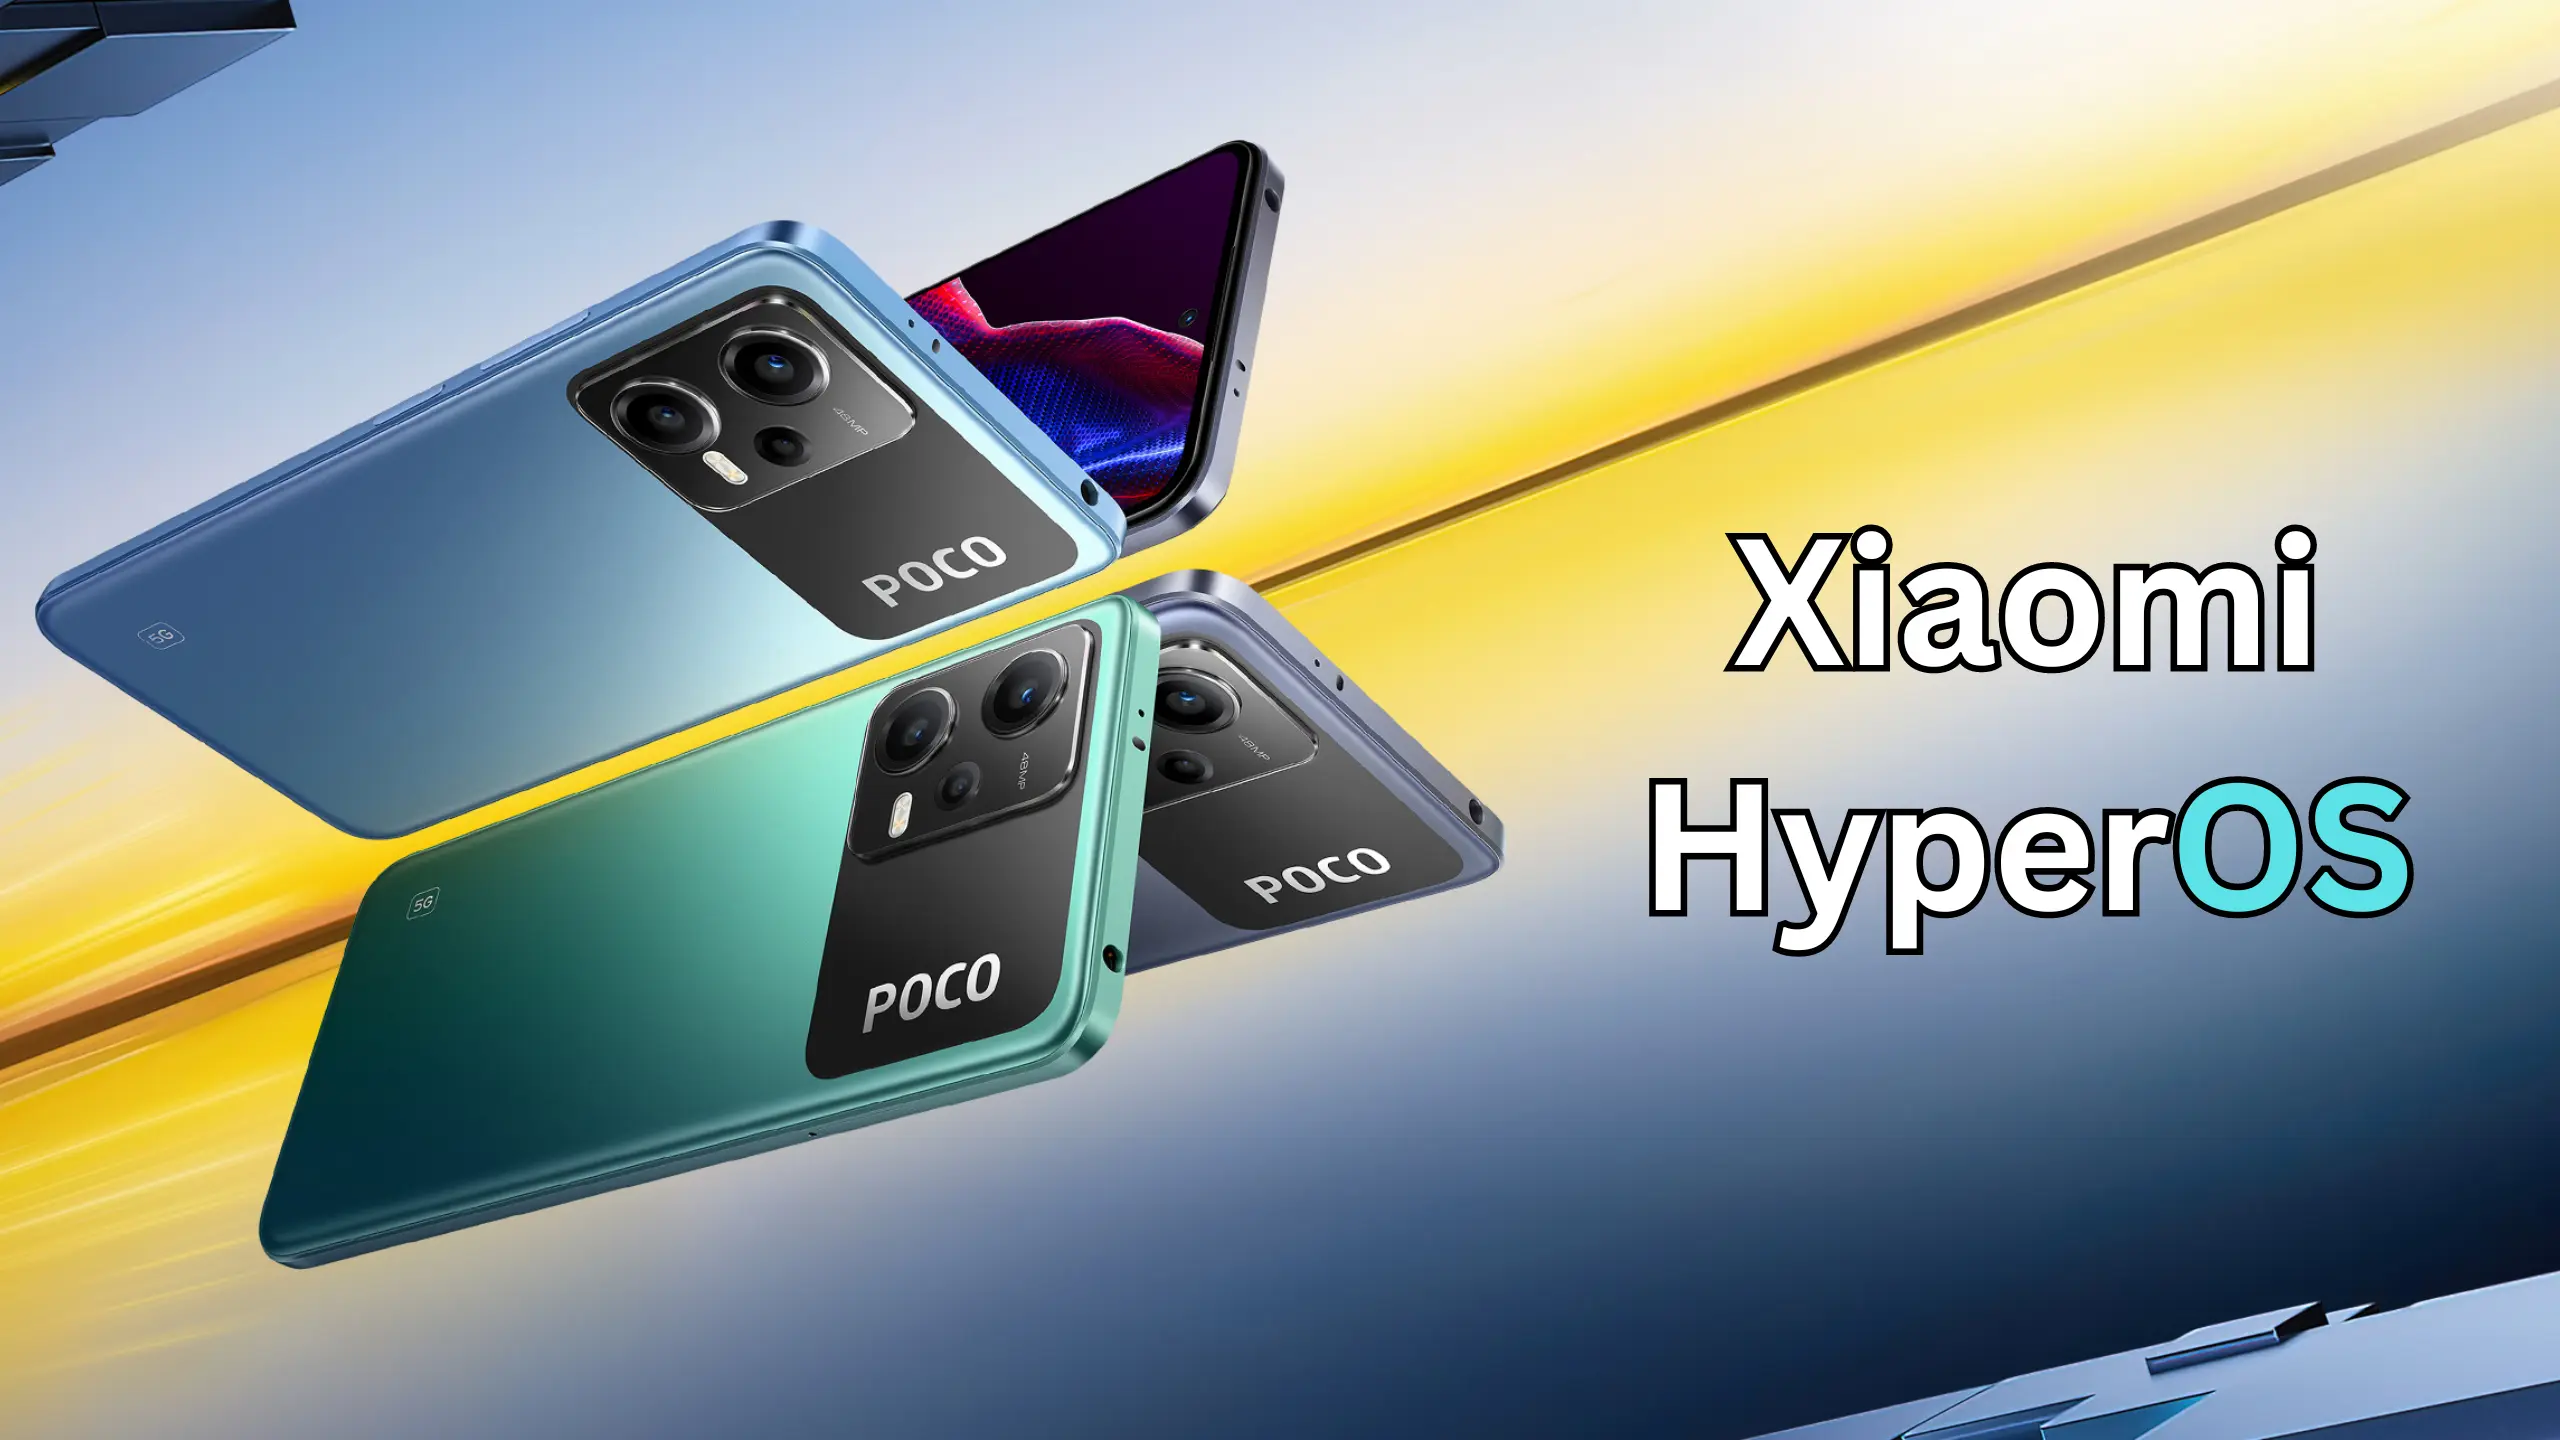 POCO X3 Pro will receive HyperOS 1.0 update? Here are all the